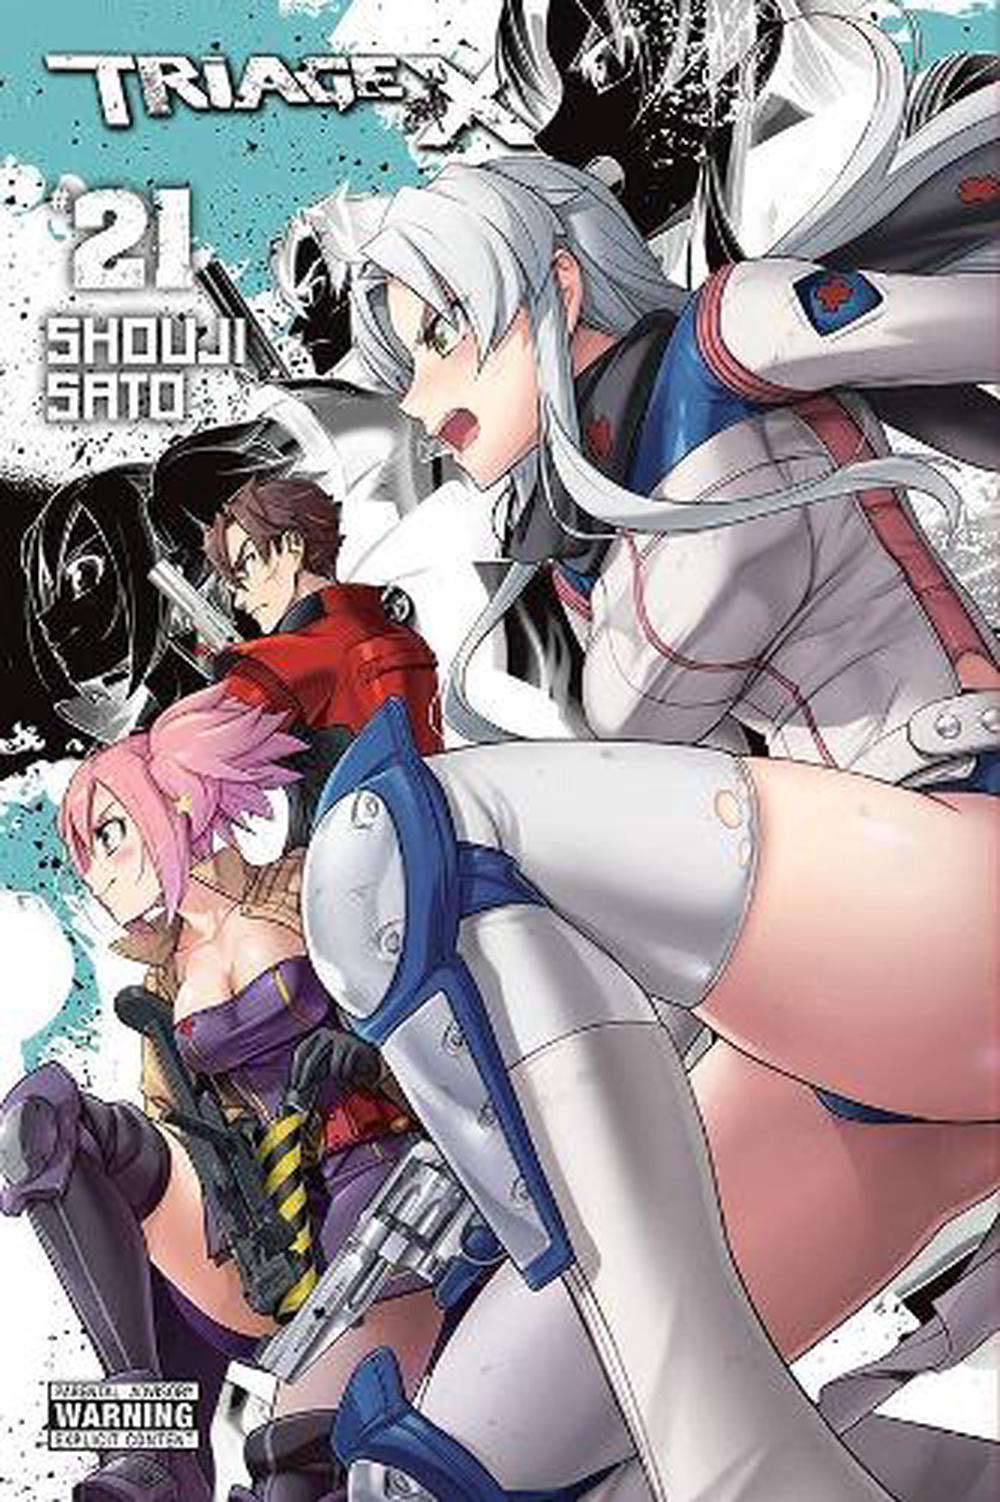 Triage X Vol 21 By Shouji Sato Paperback Buy Online At The Nile